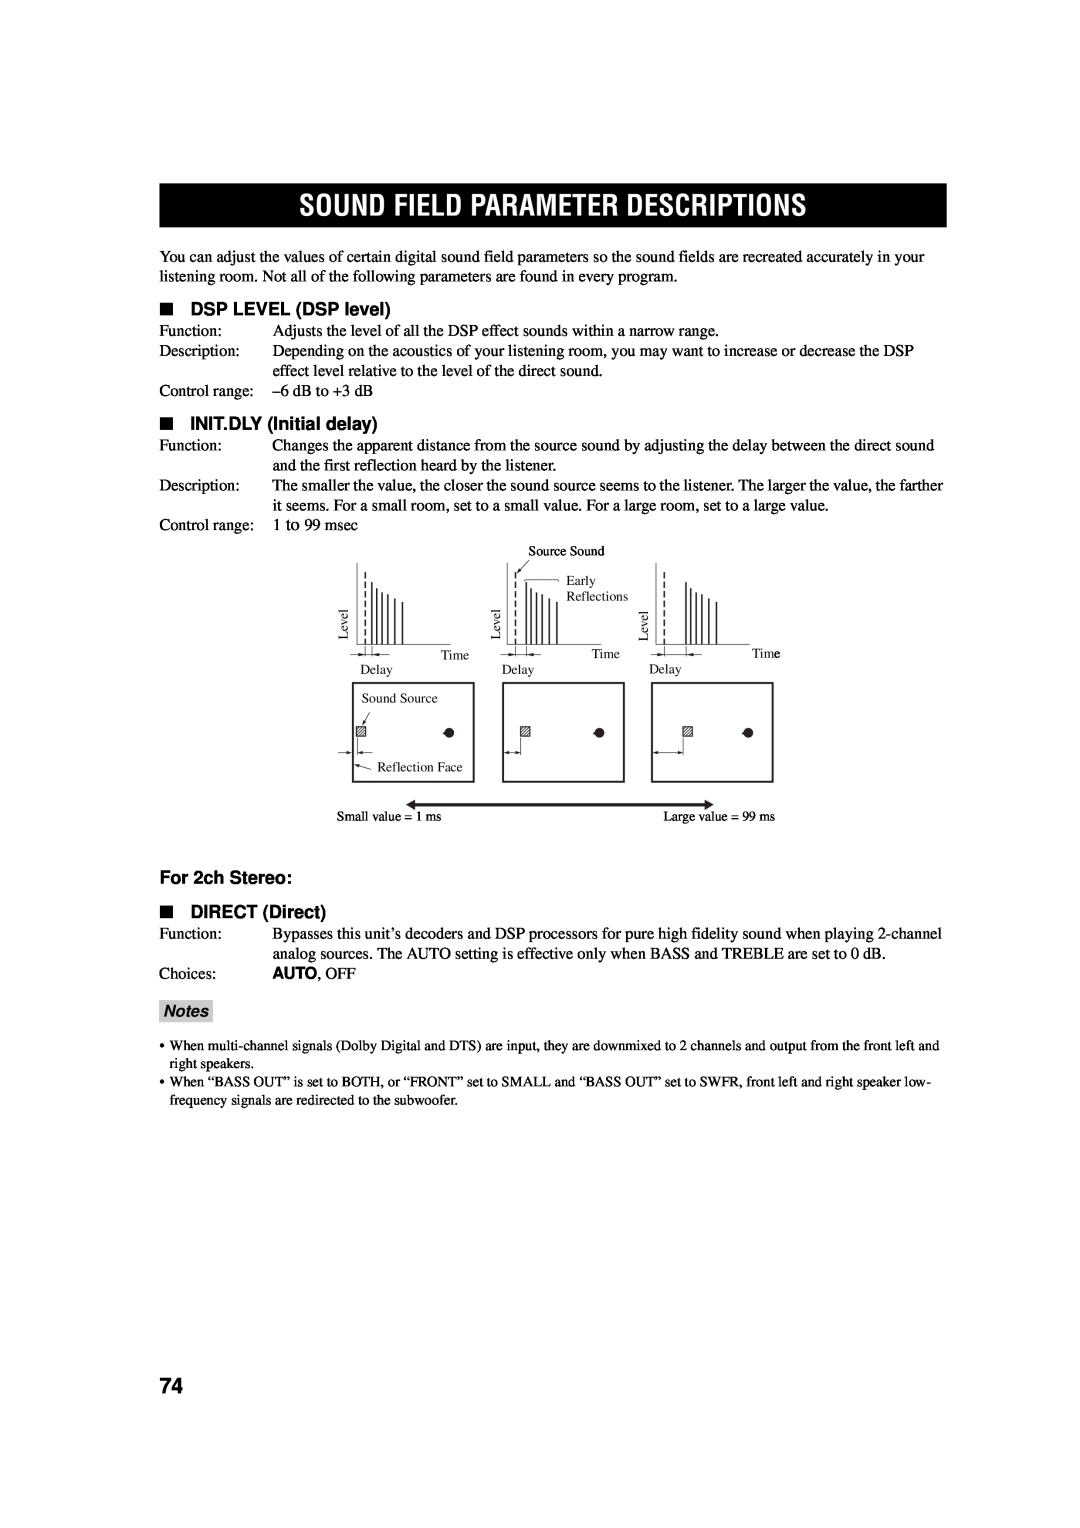 Yamaha AV Receiver owner manual Sound Field Parameter Descriptions, DSP LEVEL DSP level, INIT.DLY Initial delay, Notes 